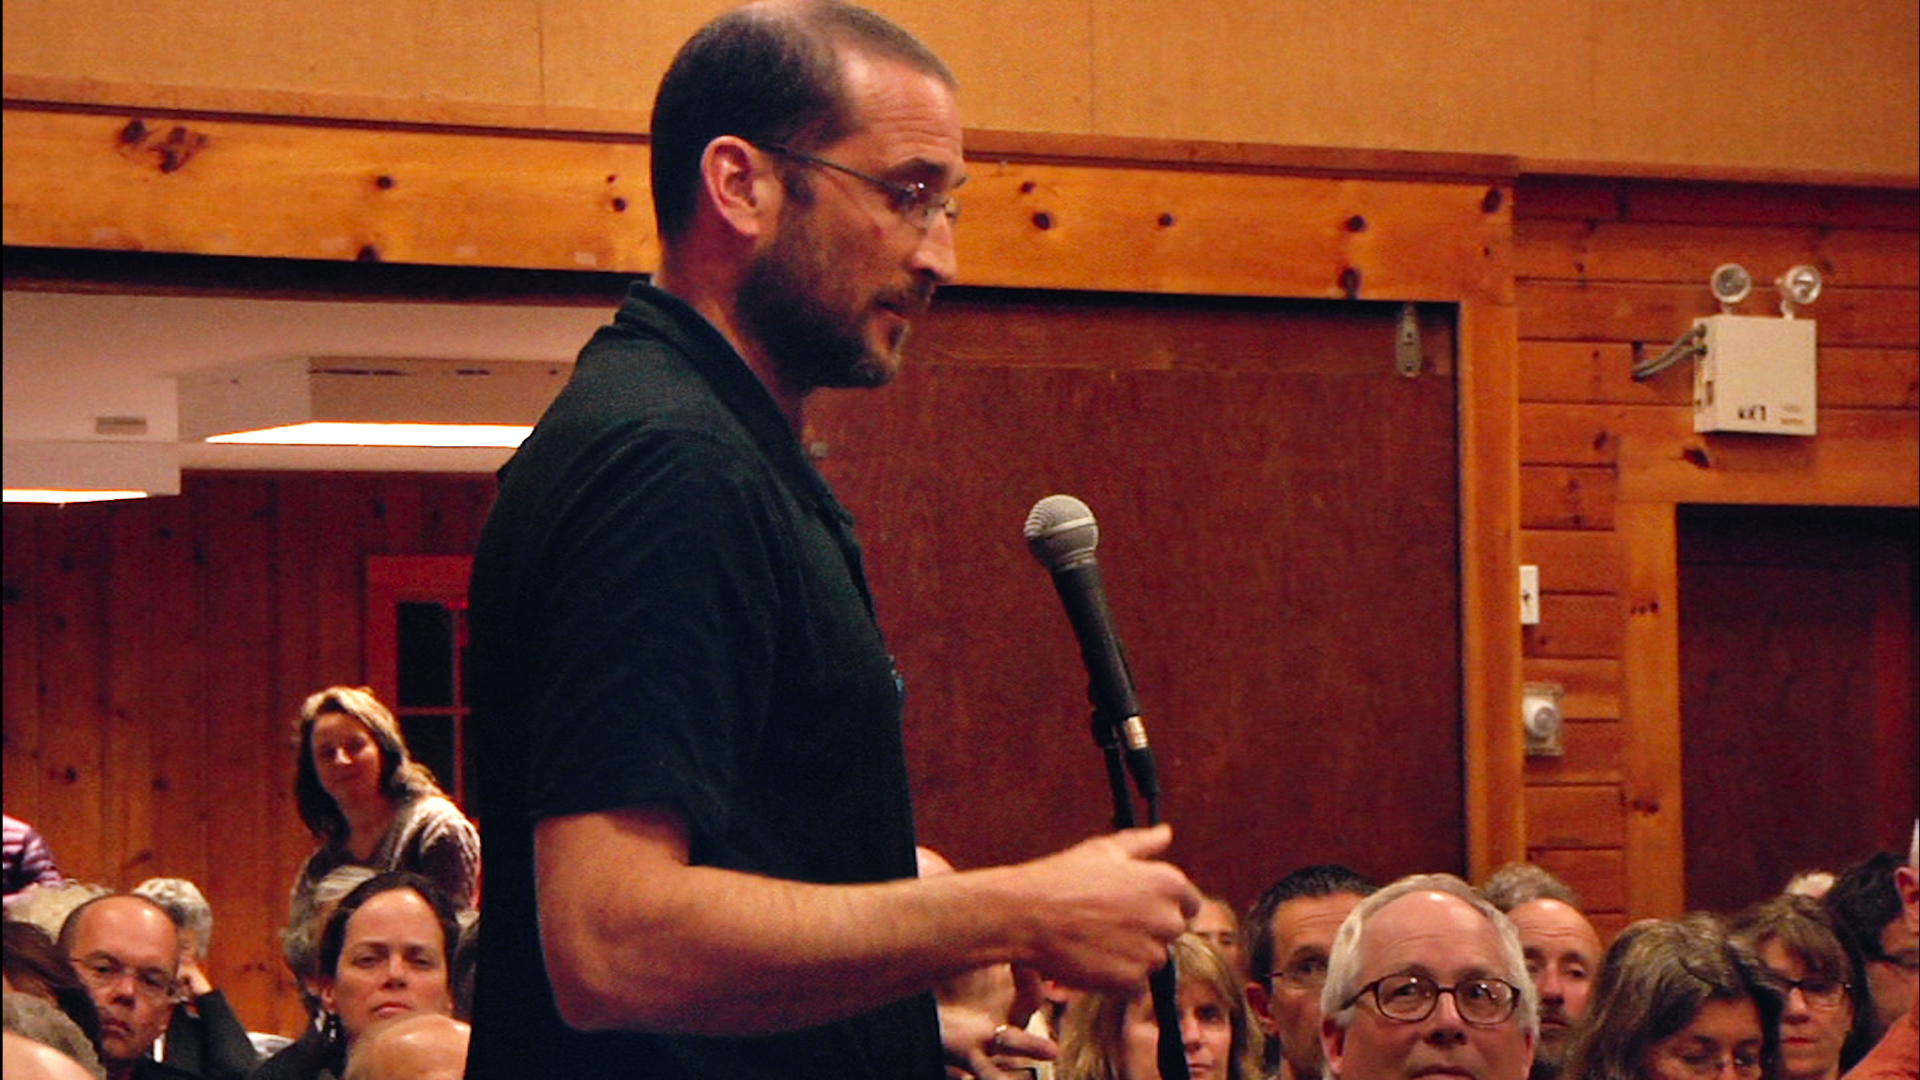 Filmmaker Thomas Bena speaks at Chilmark's town meeting in support of a bylaw limiting house size